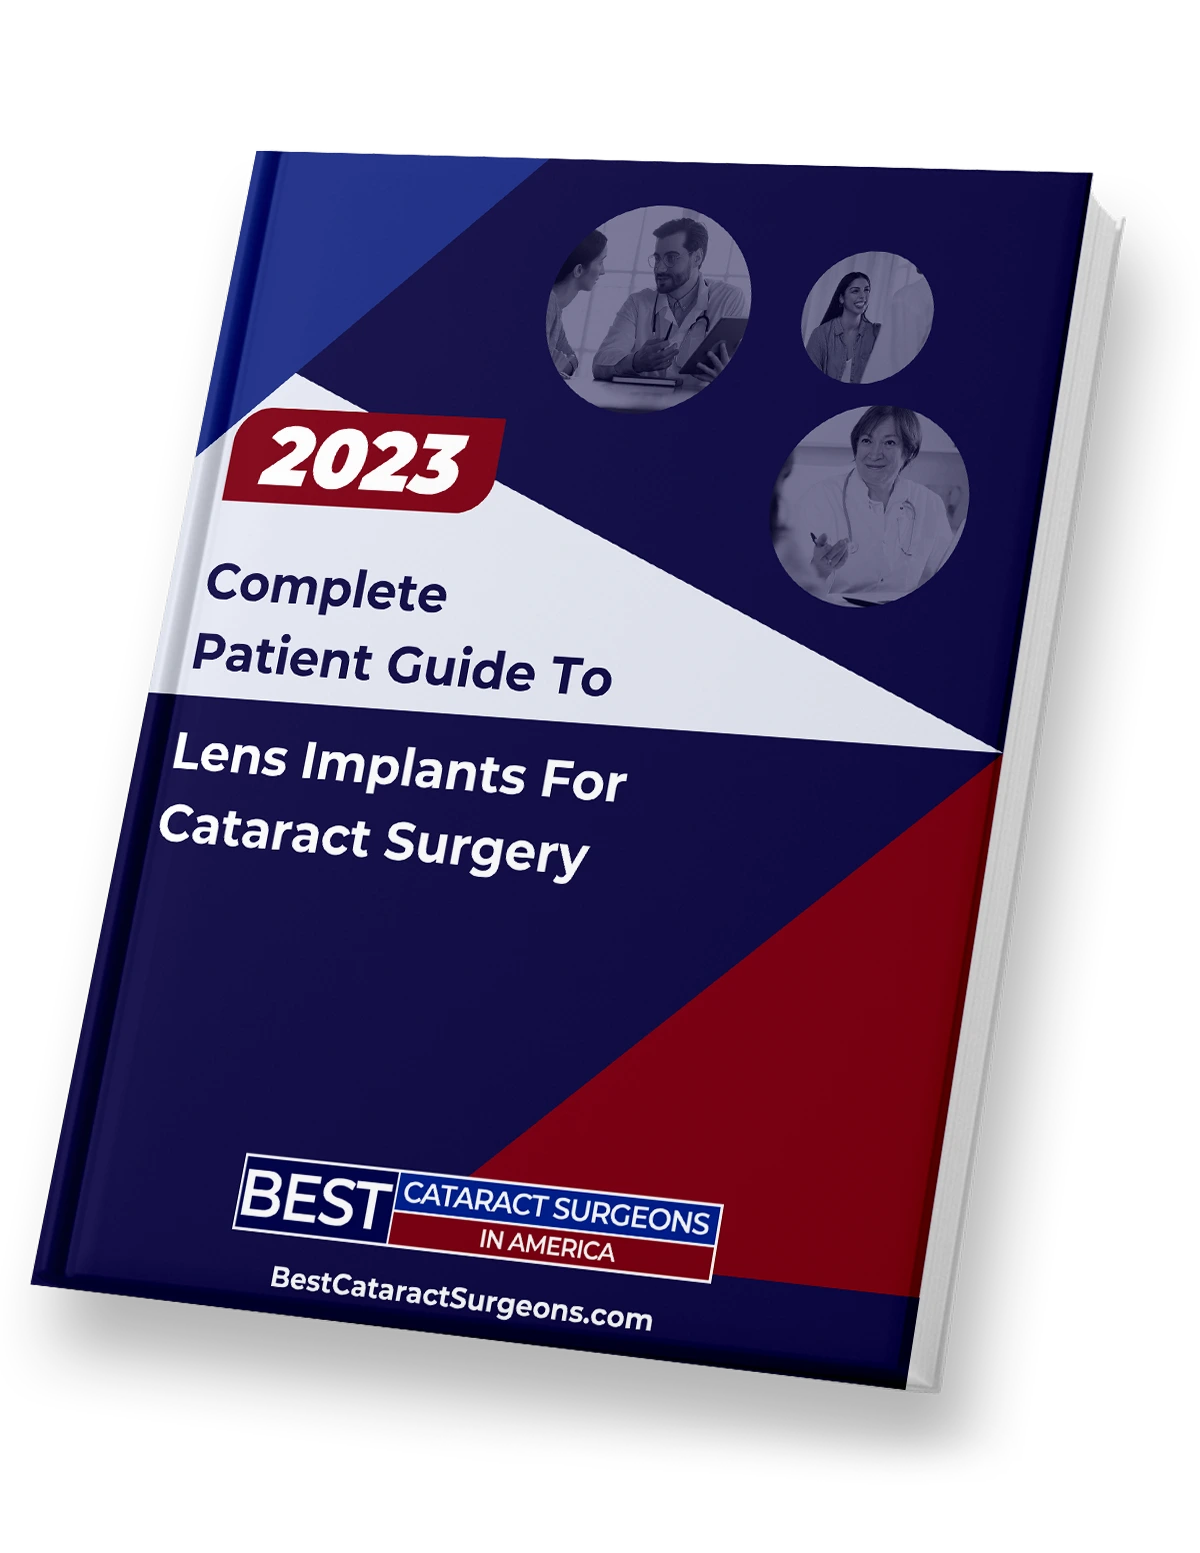 Patient Guide to Cataract Surgery